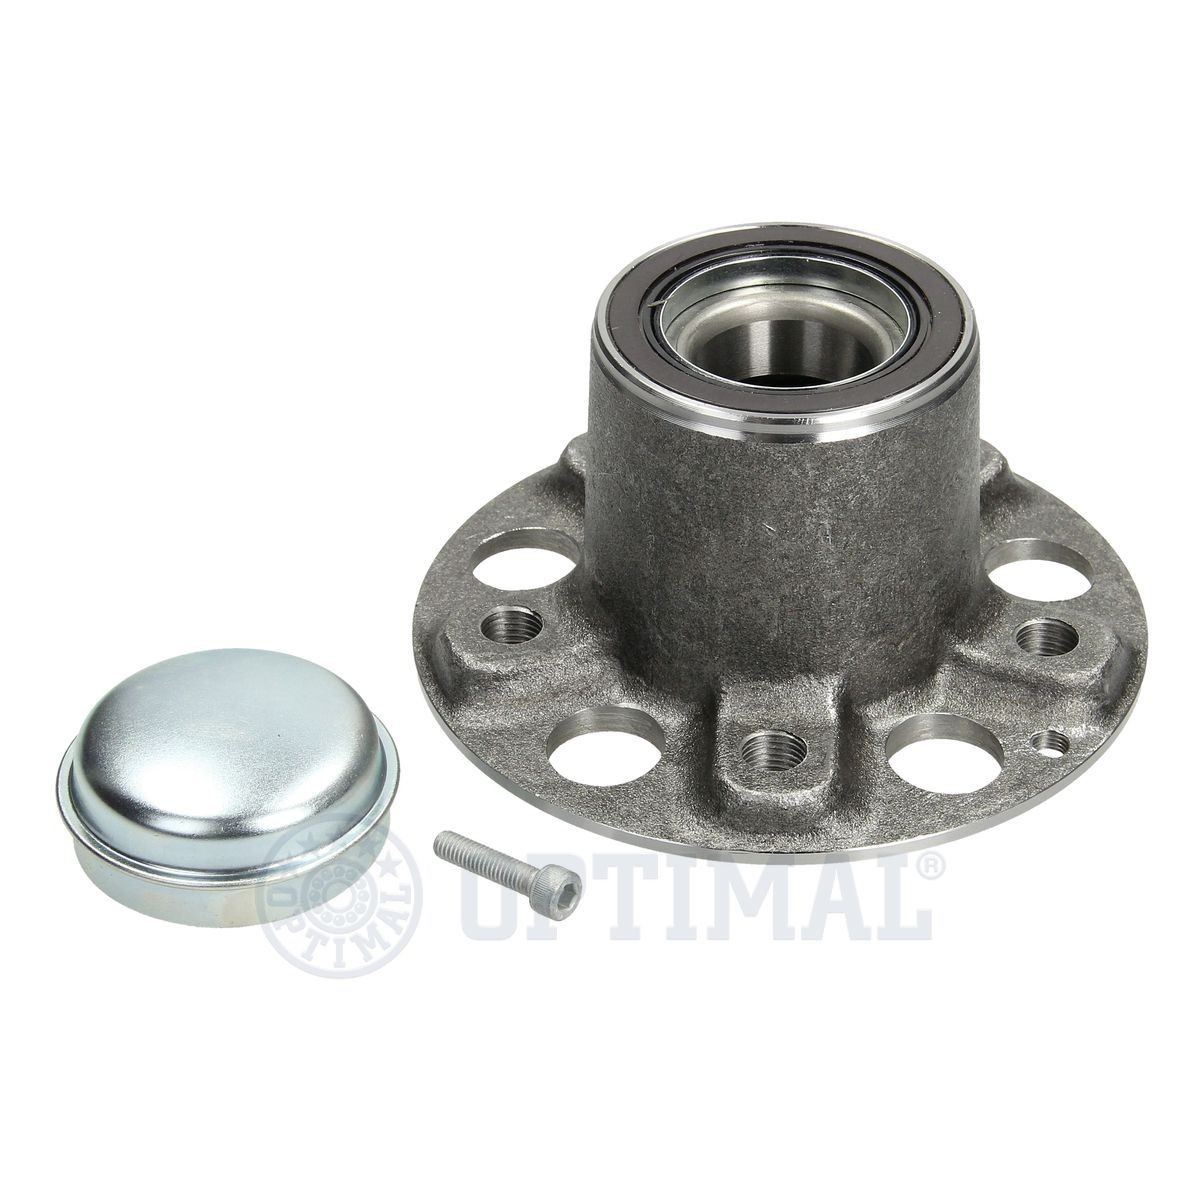 OPTIMAL 401158L Wheel bearing kit with fastening material, with integrated magnetic sensor ring, Wheel Bearing integrated into wheel hub, 50 mm